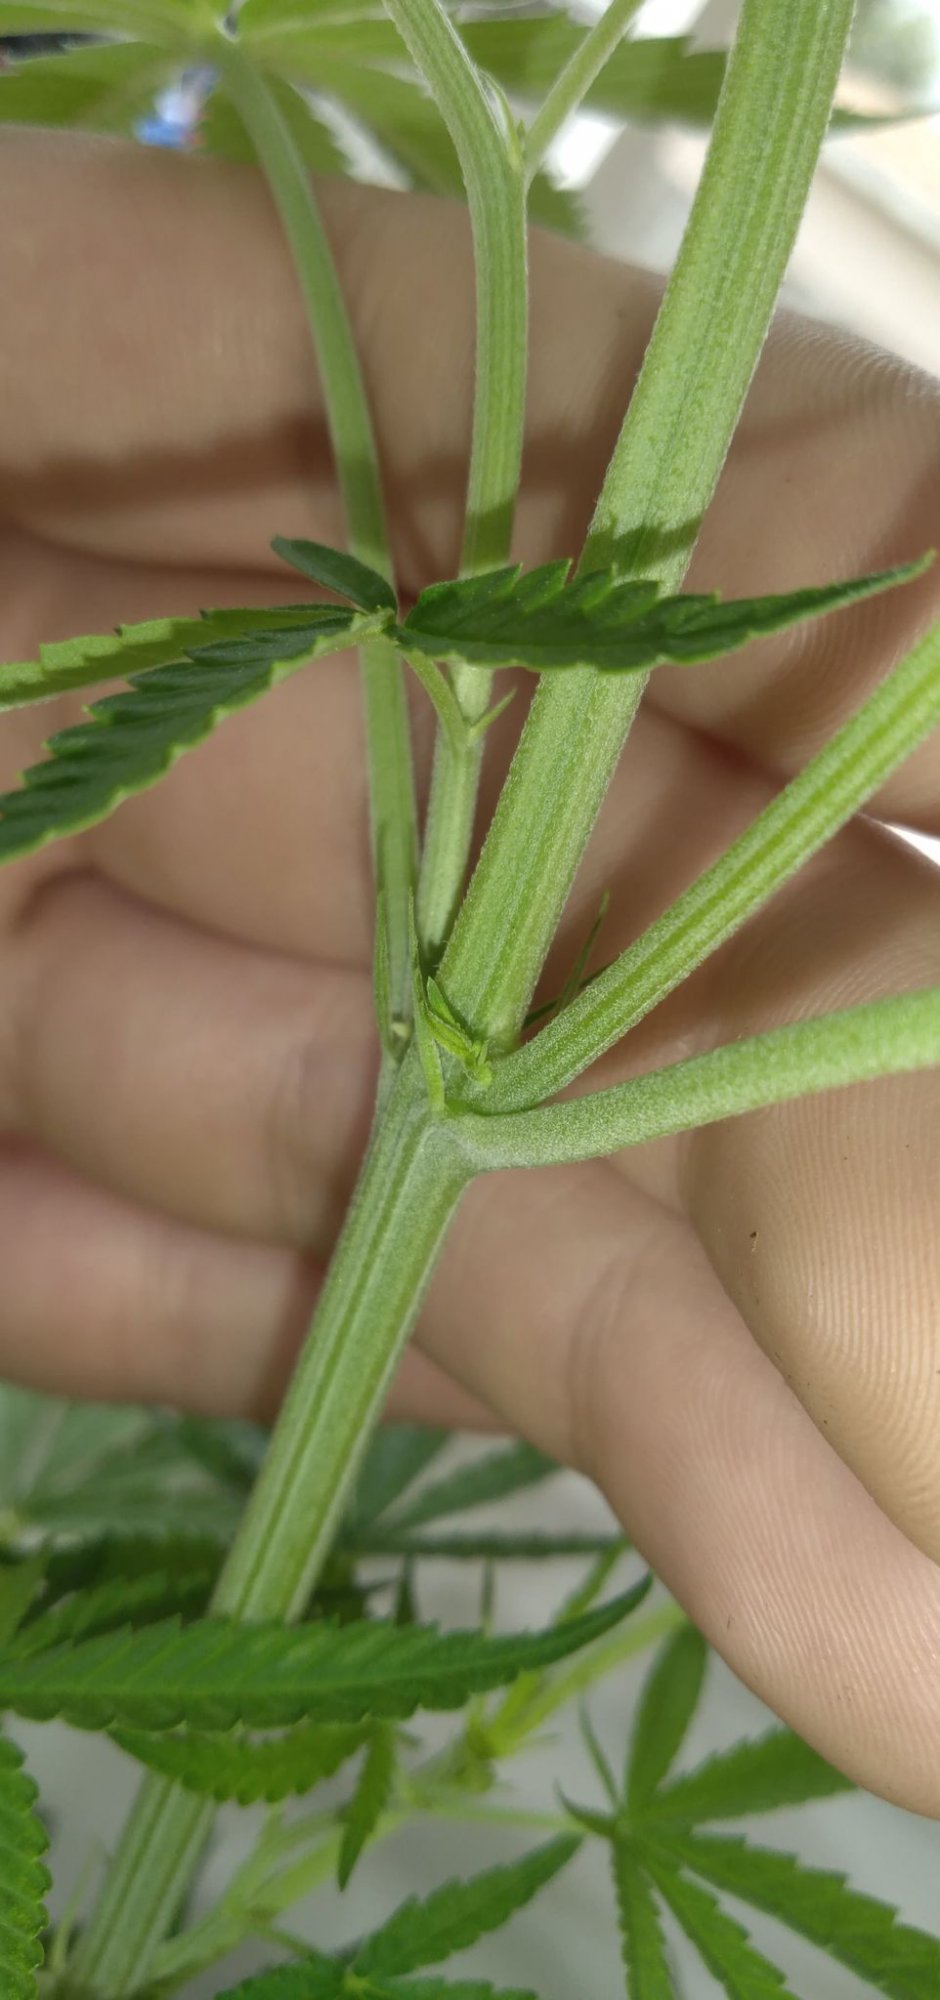 Does this look like a calyx mutation